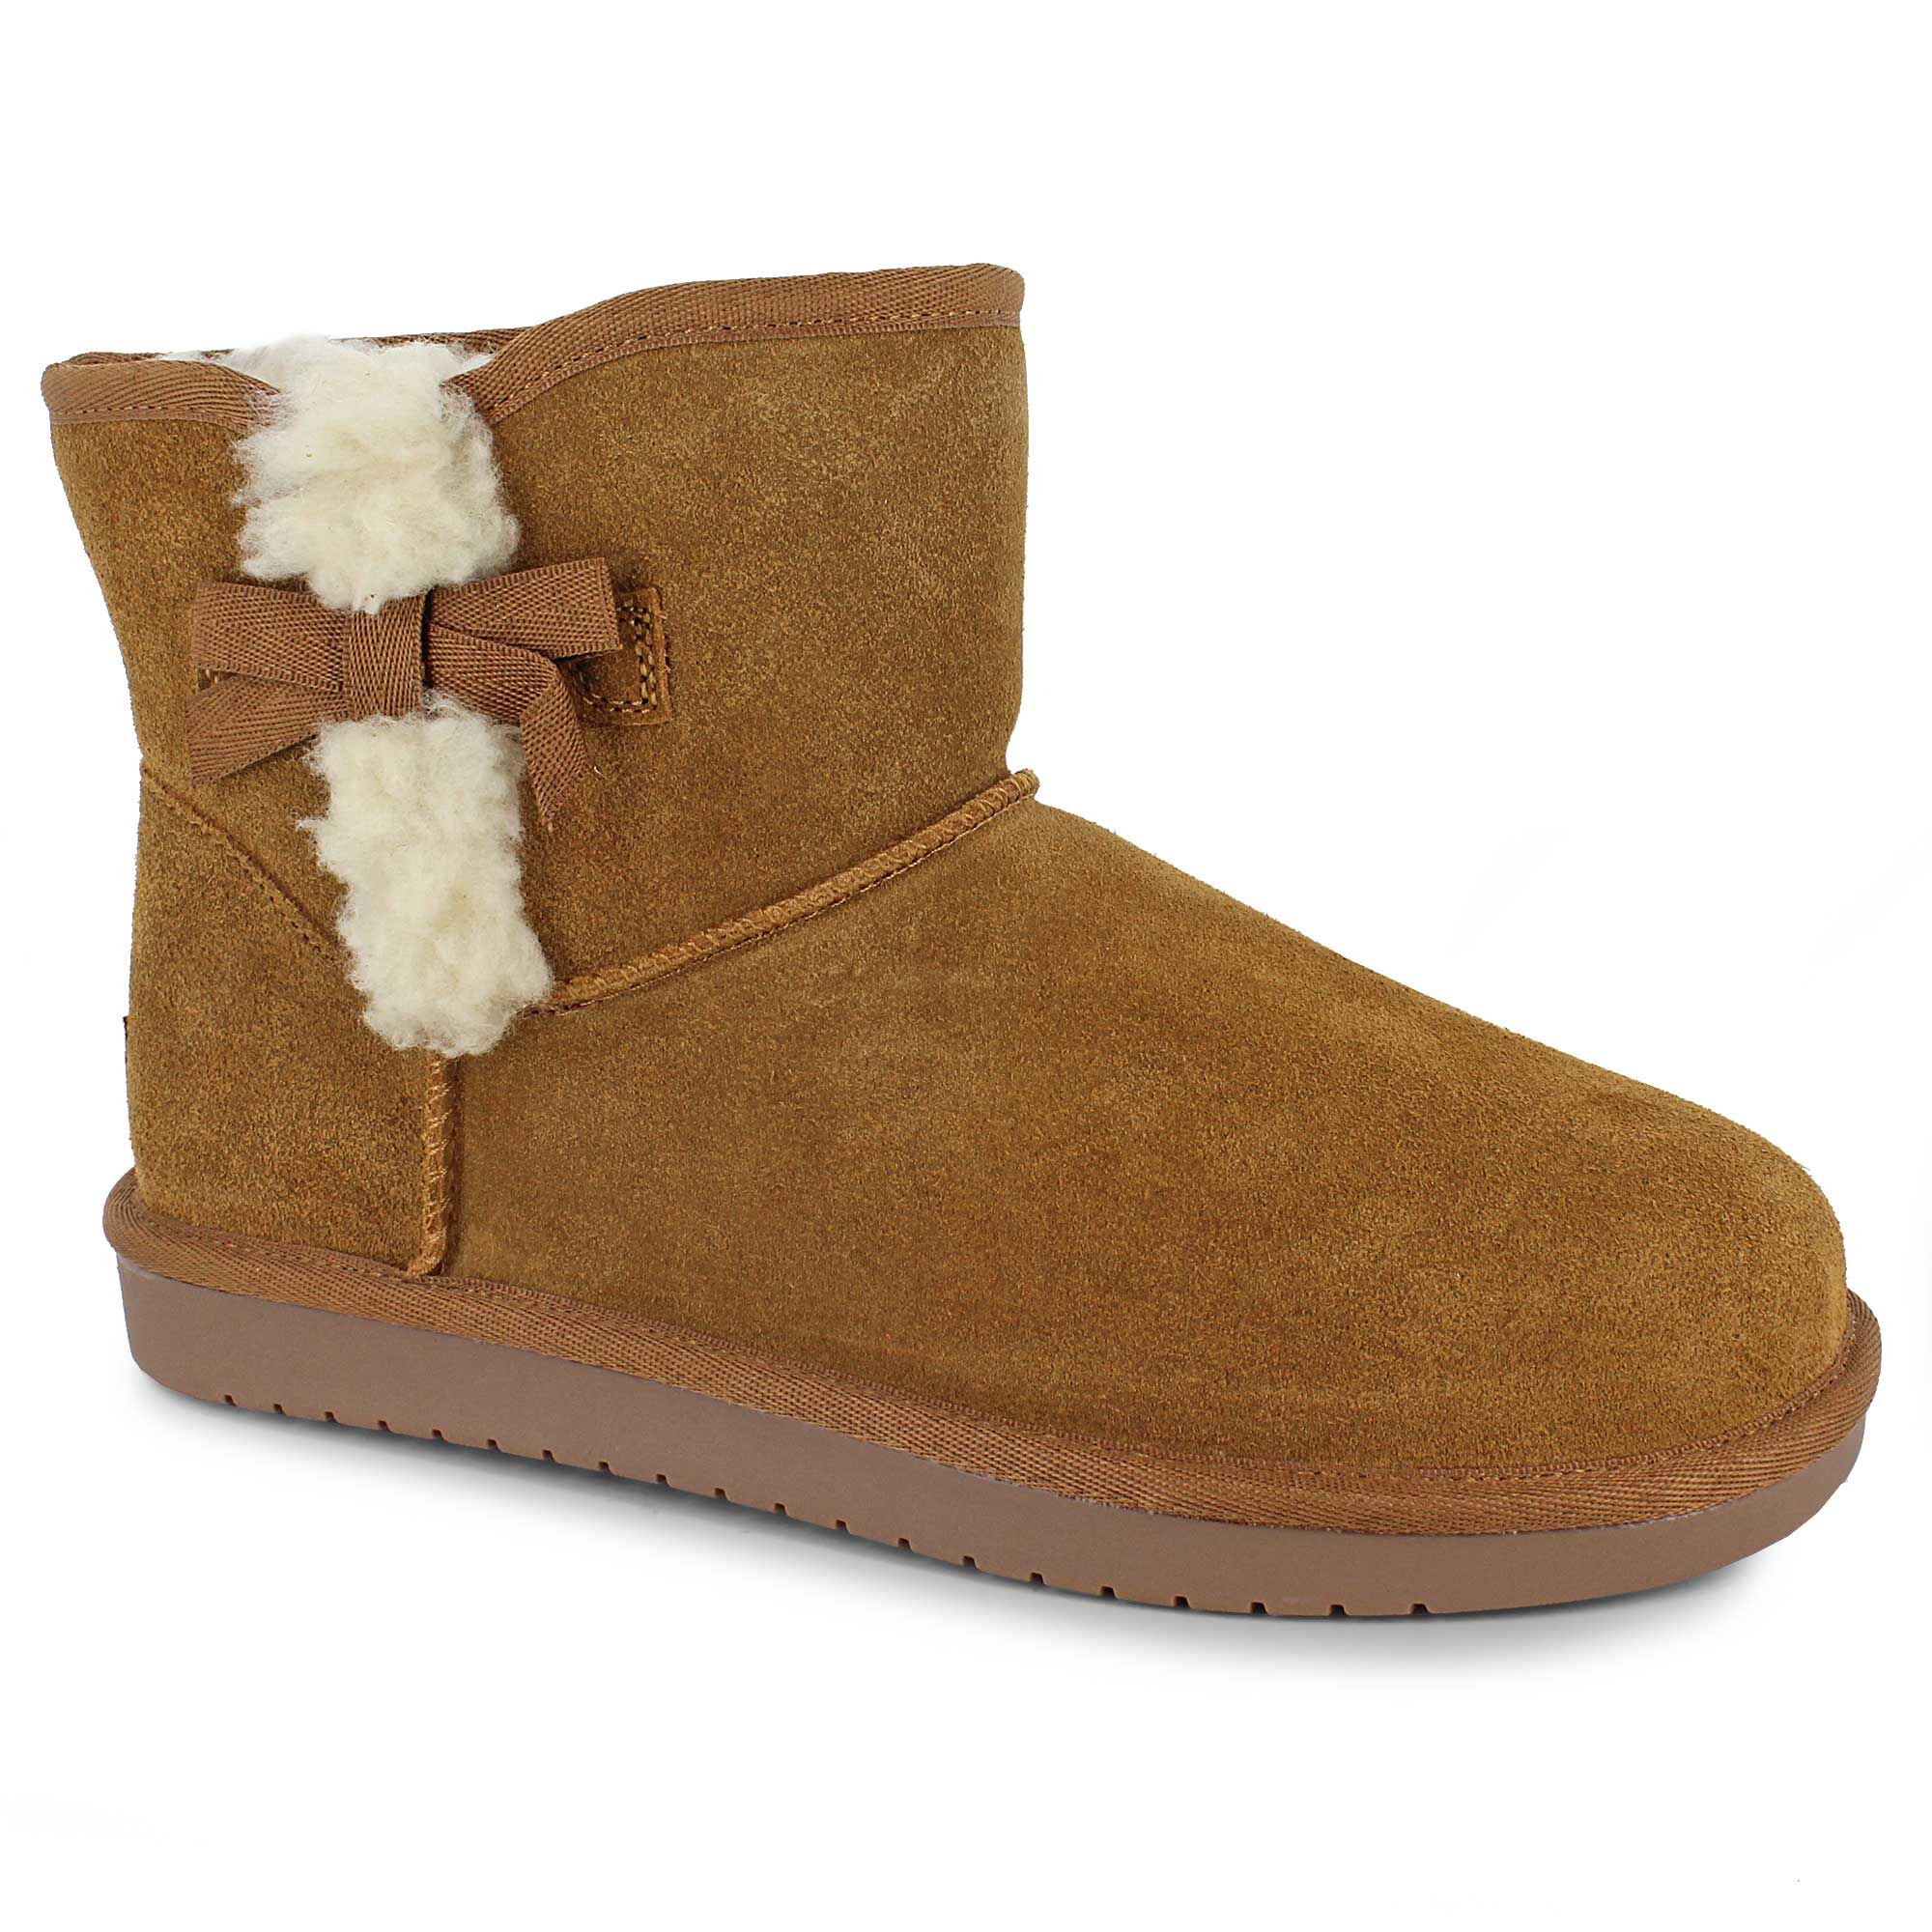 shoe show ugg boots